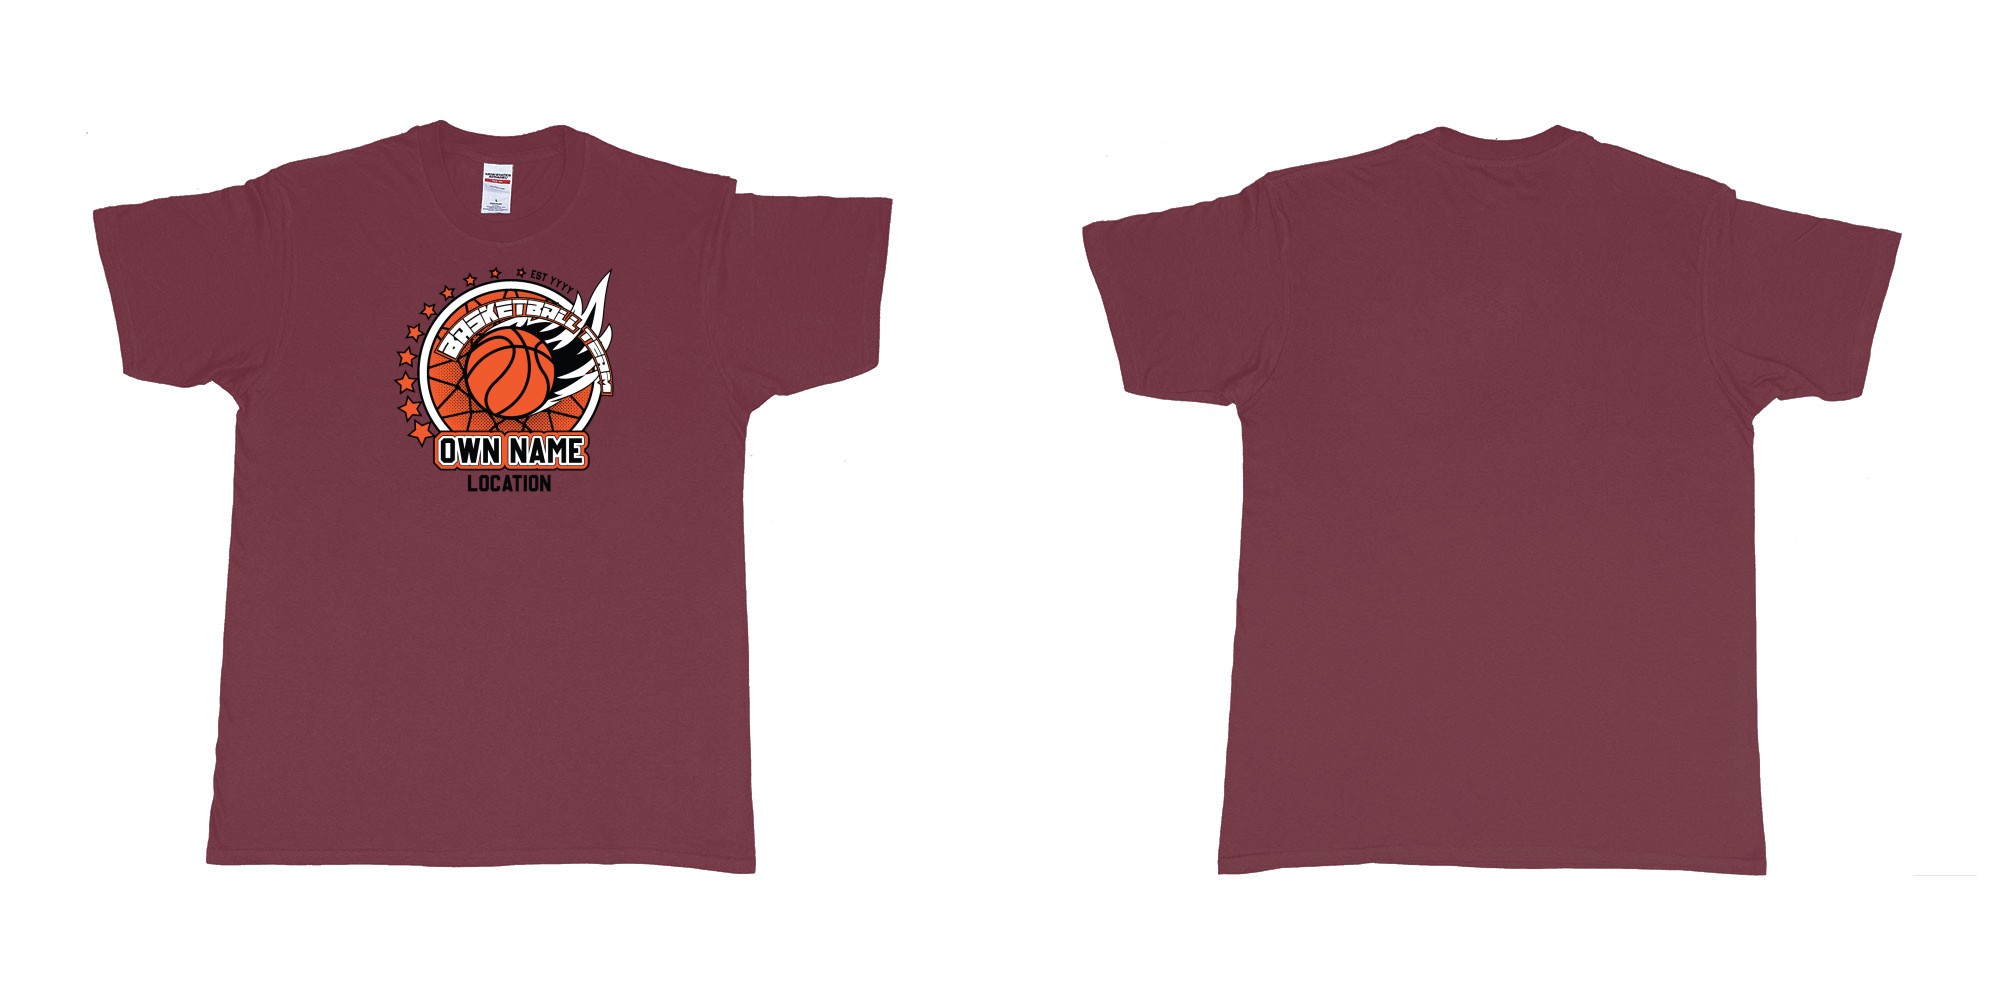 Custom tshirt design basketball team own name location established year custom design production bali in fabric color marron choice your own text made in Bali by The Pirate Way